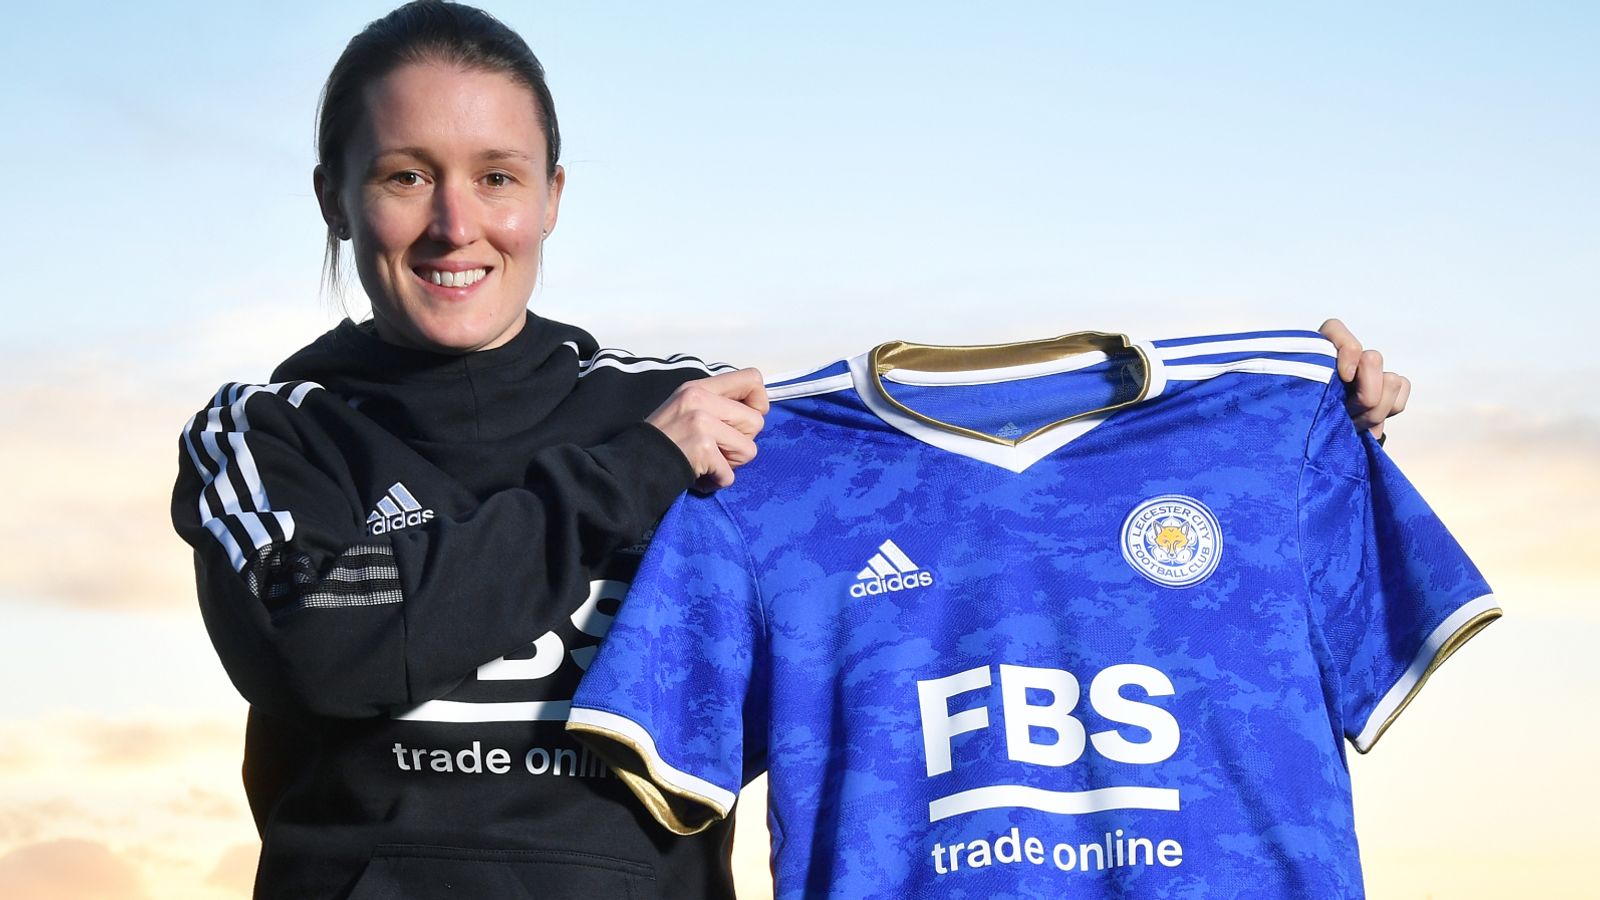 esqueleto Abreviatura Insatisfecho Leicester Women manager Lydia Bedford on her career, taking over the squad  and facing Arsenal Women | Football News | Sky Sports